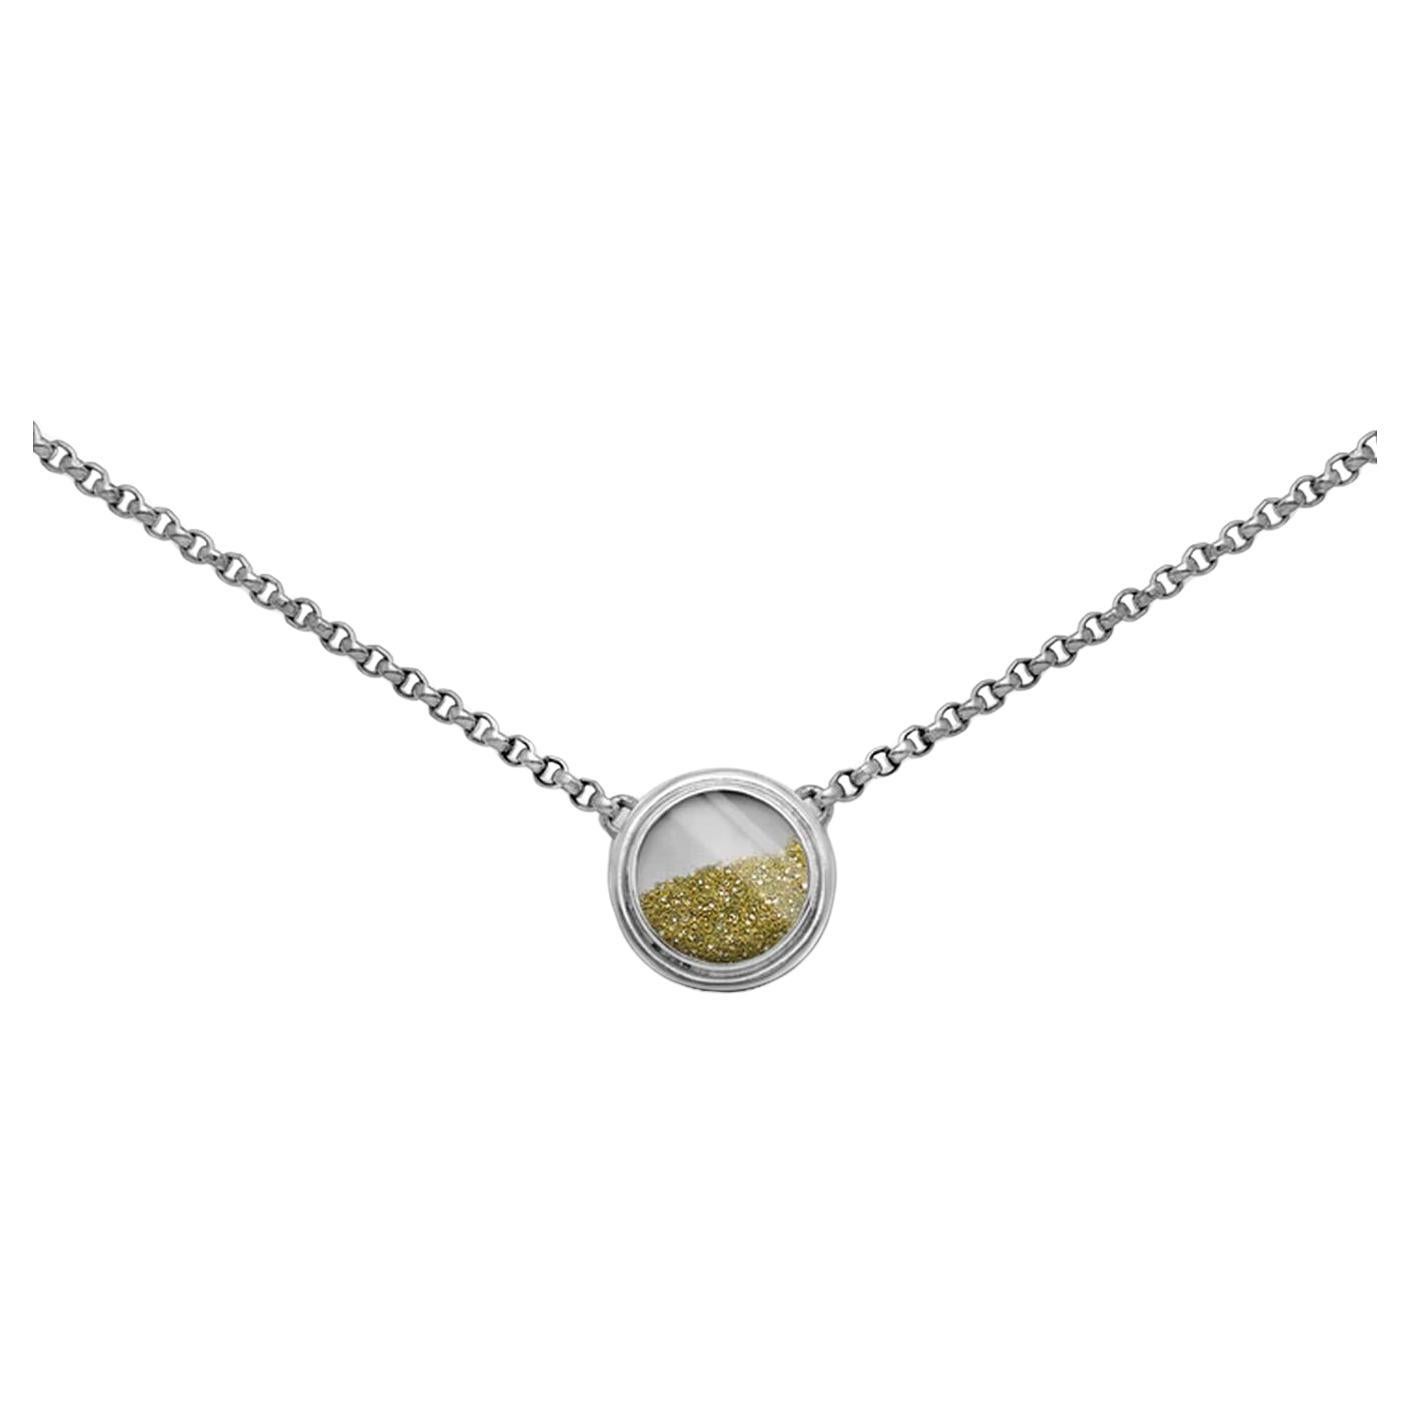 Sparkling Golden Diamond Dust Sterling Silver Pendant Link Chain Necklace For Sale